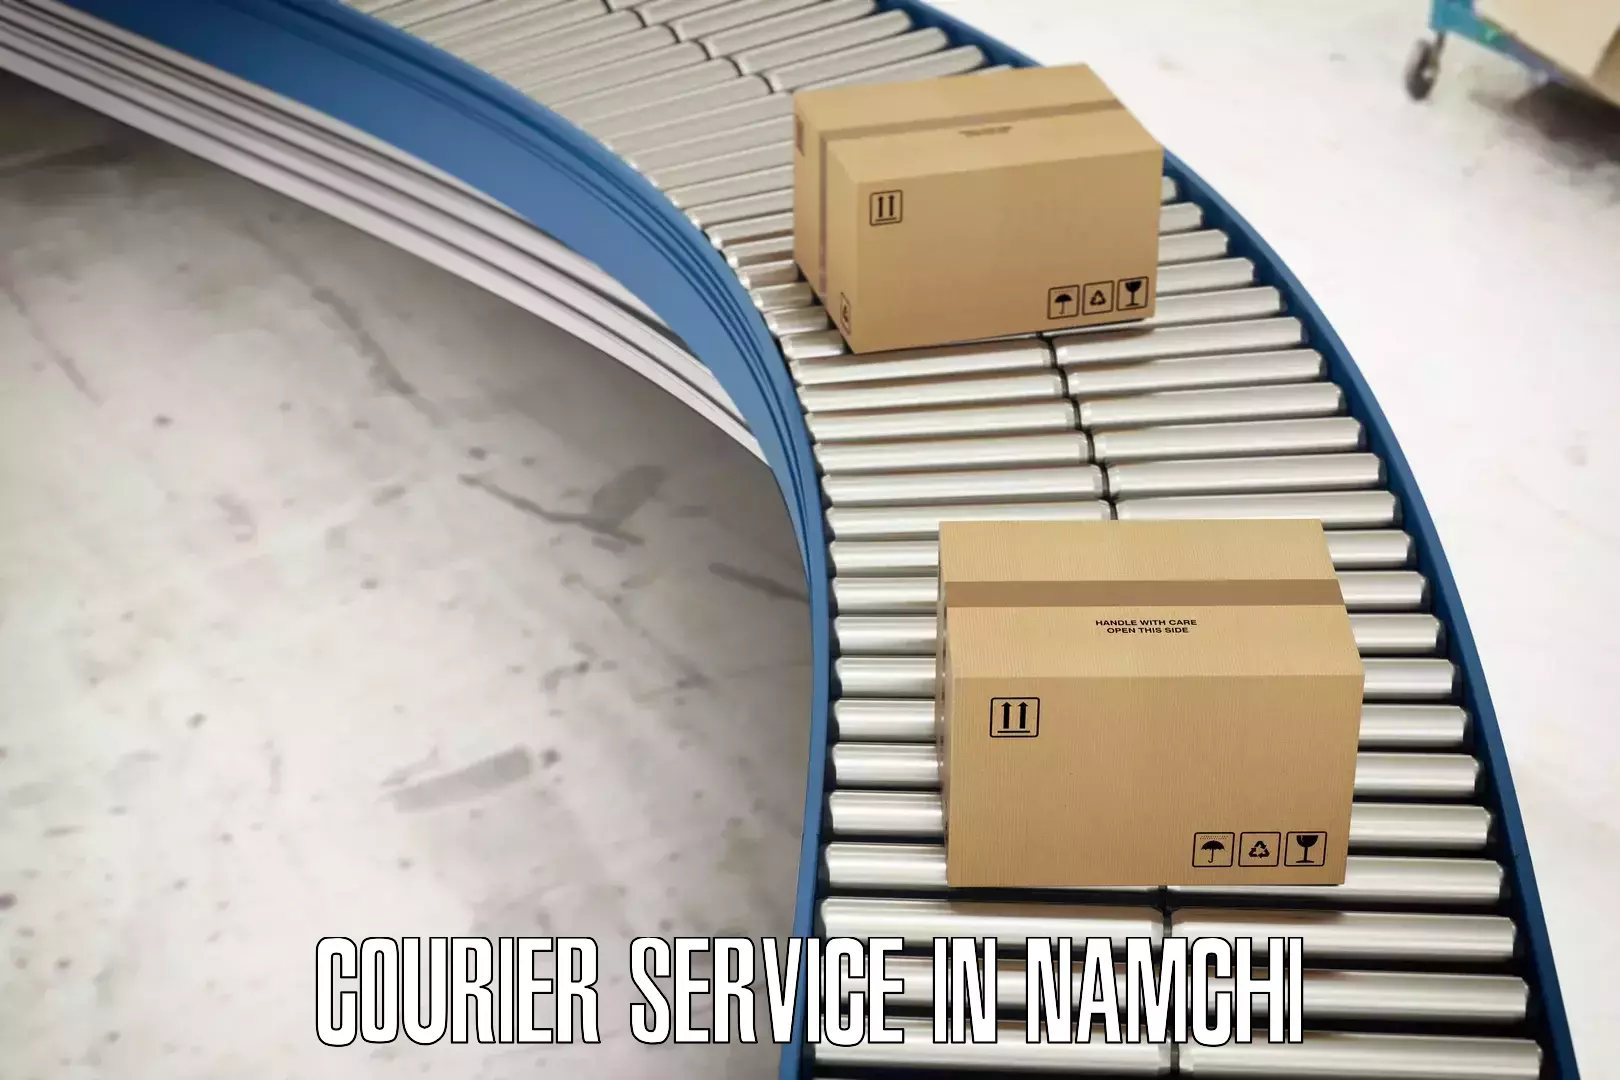 Courier service booking in Namchi